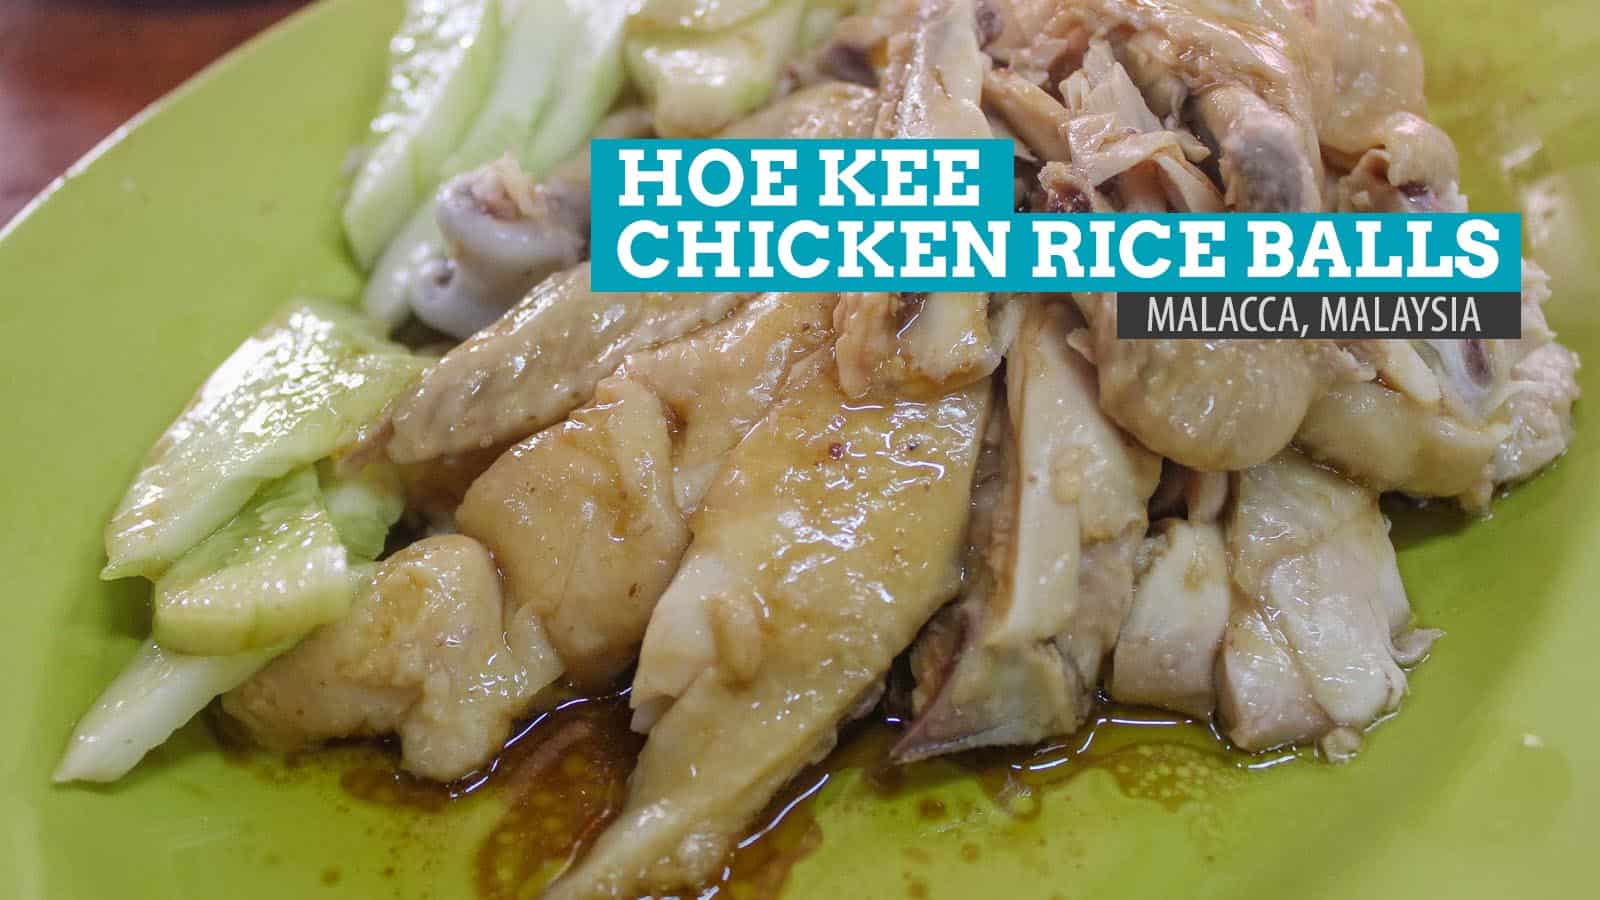 Hoe Kee Chicken Rice Balls: Where to Eat in Malacca, Malaysia